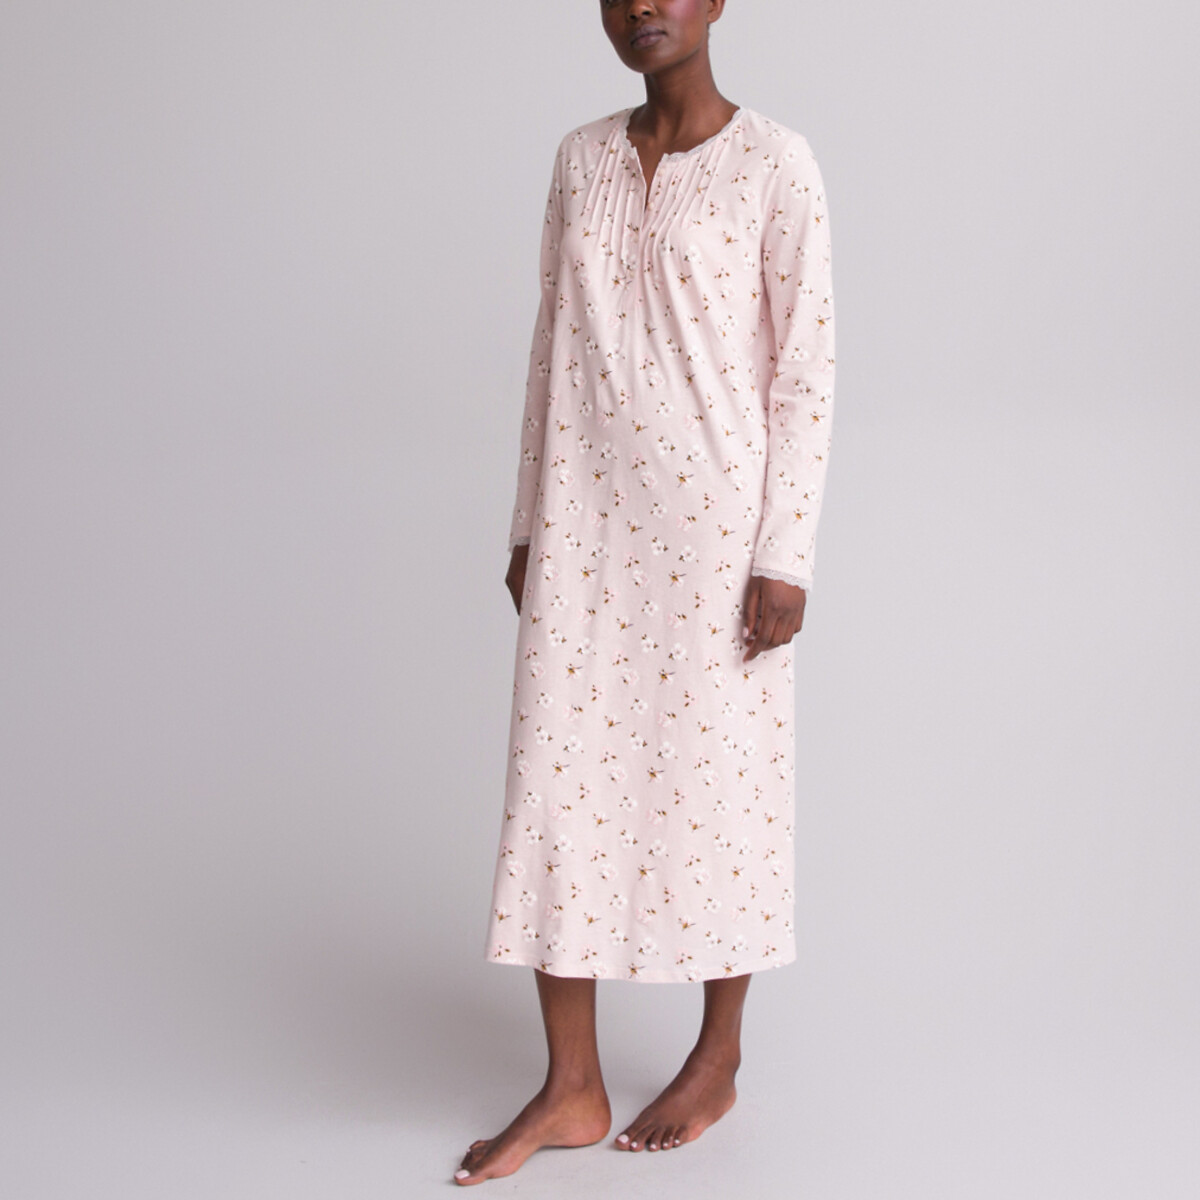 Floral Print Cotton Nightdress with Long Sleeves